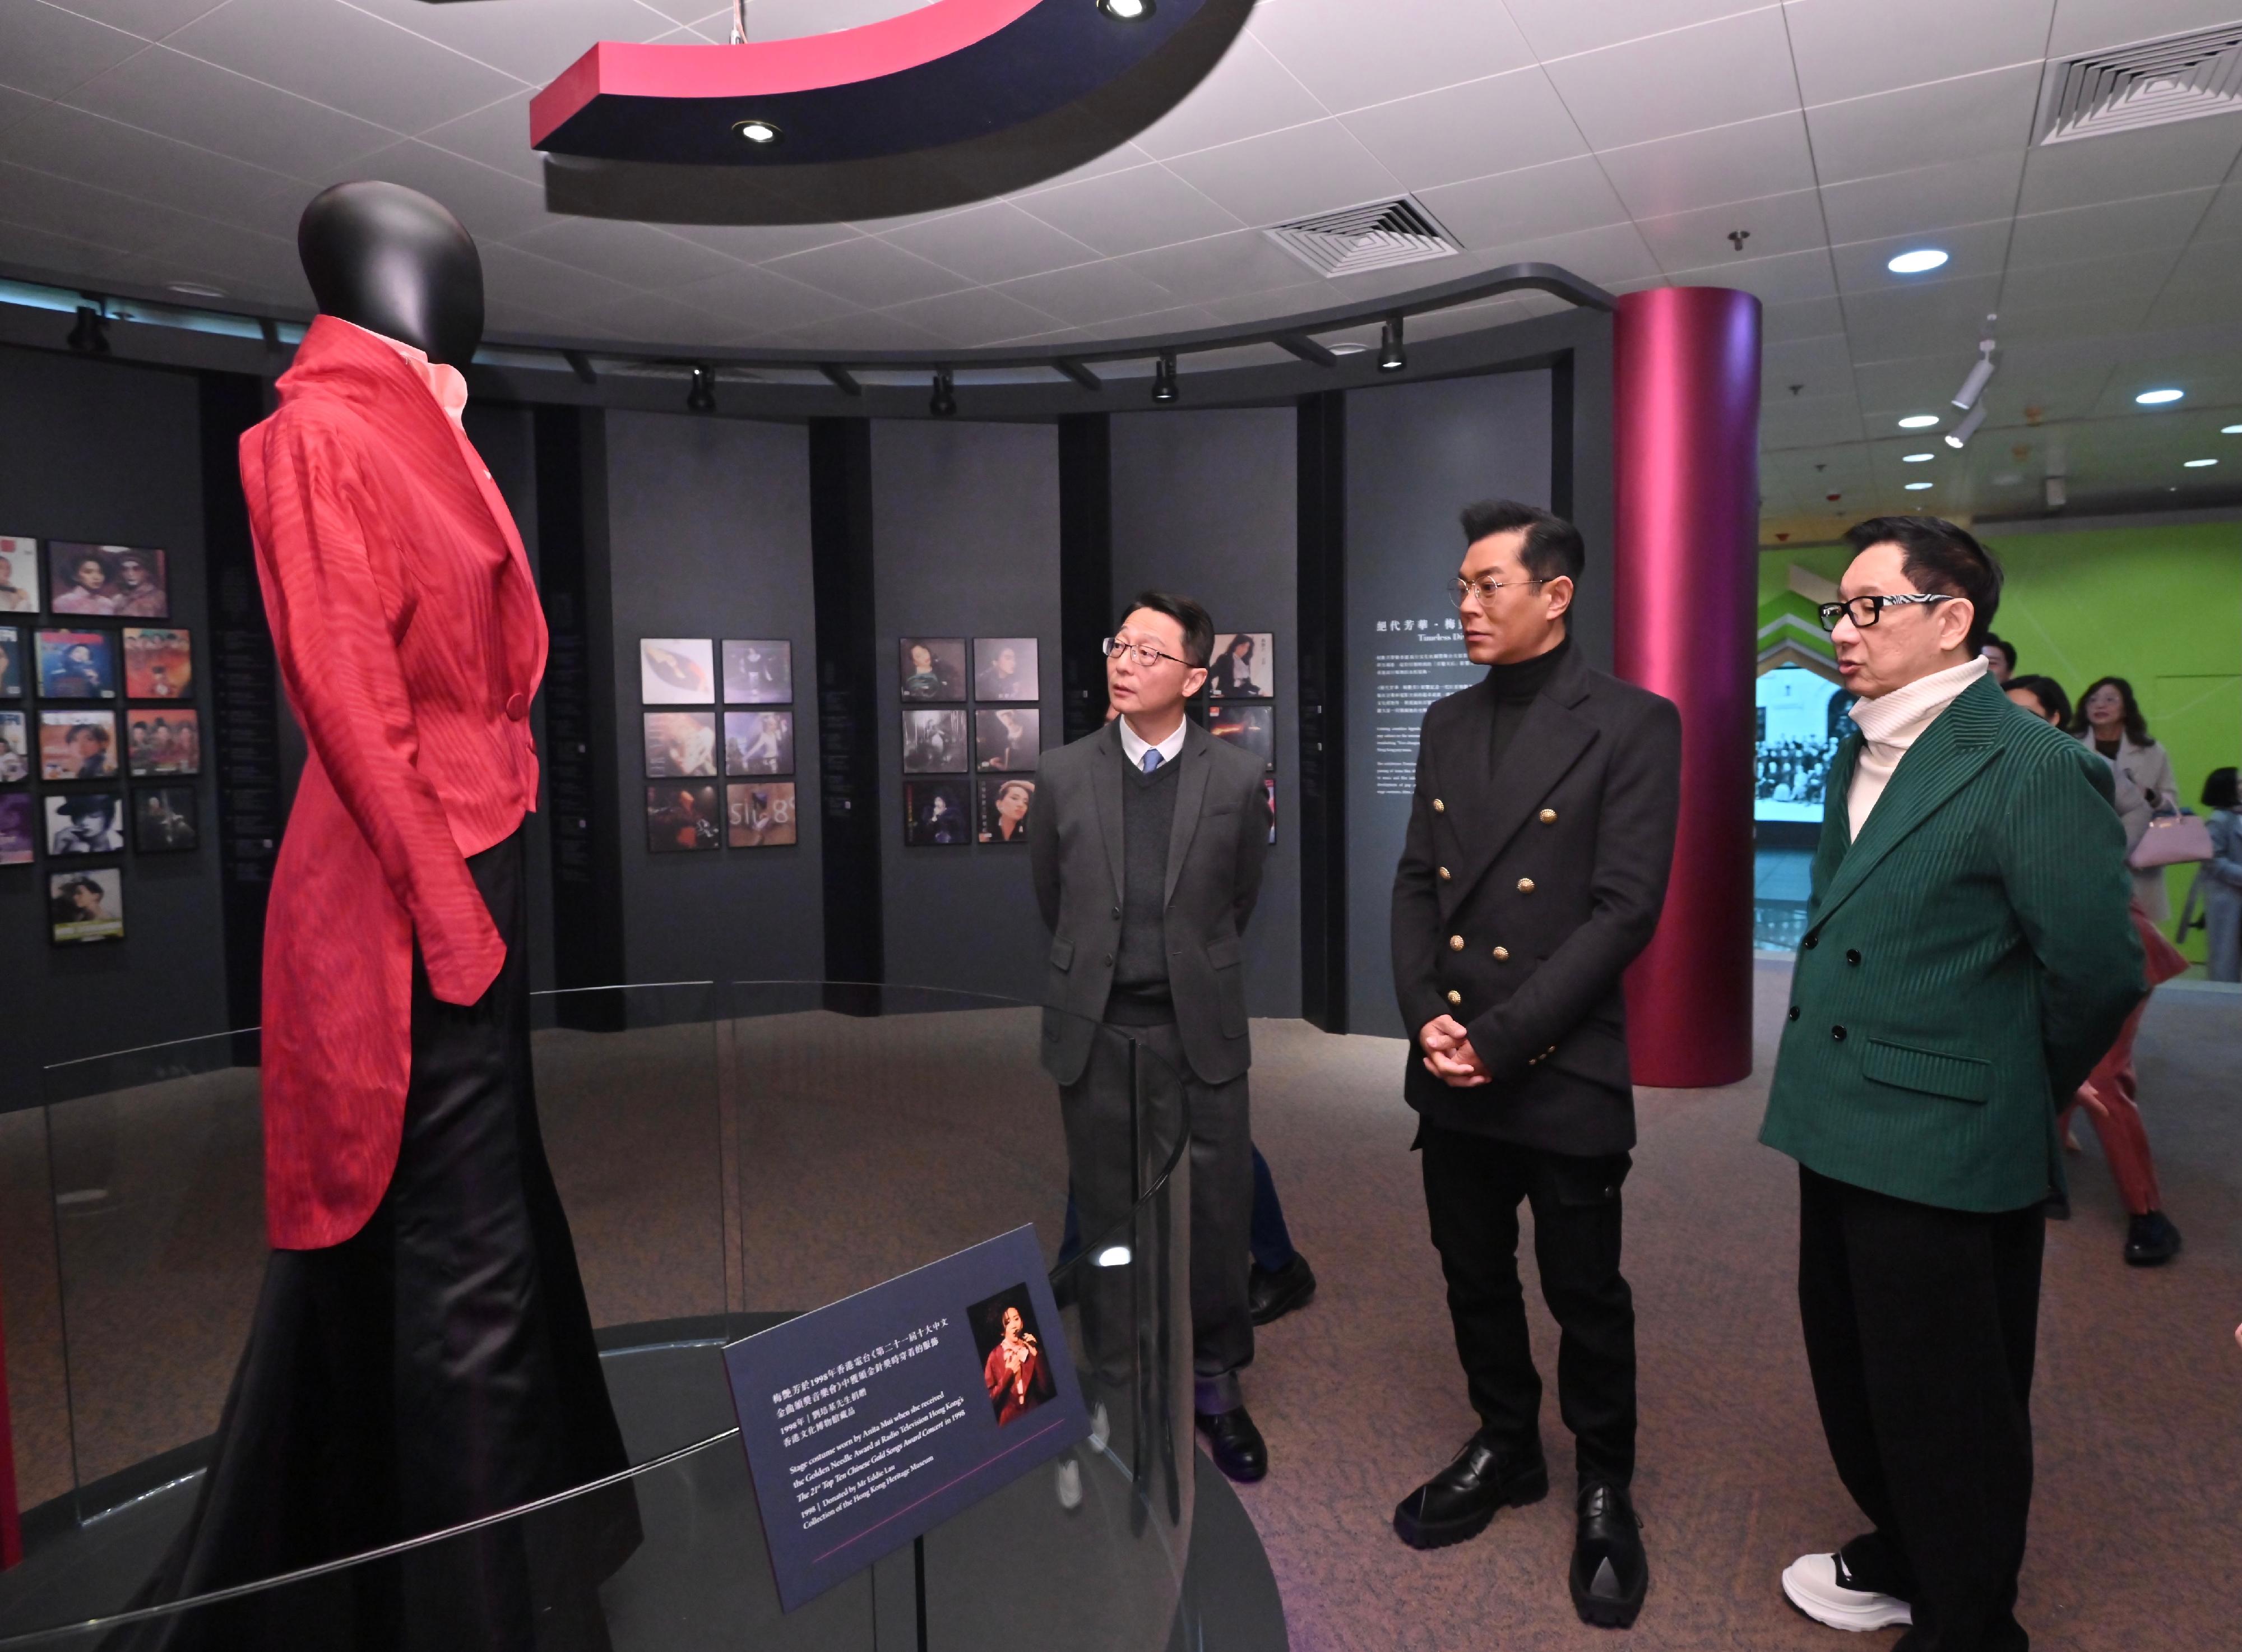 The opening ceremony for the "Timeless Diva: Anita Mui" exhibition was held today (December 23) at the Hong Kong Heritage Museum. Photo shows the officiating guests (from left) the Director of Leisure and Cultural Services, Mr Vincent Liu; the President of the Hong Kong Performing Artistes Guild, Mr Louis Koo; and a close friend of Anita Mui and fashion and image designer, Mr Eddie Lau, touring the exhibition.